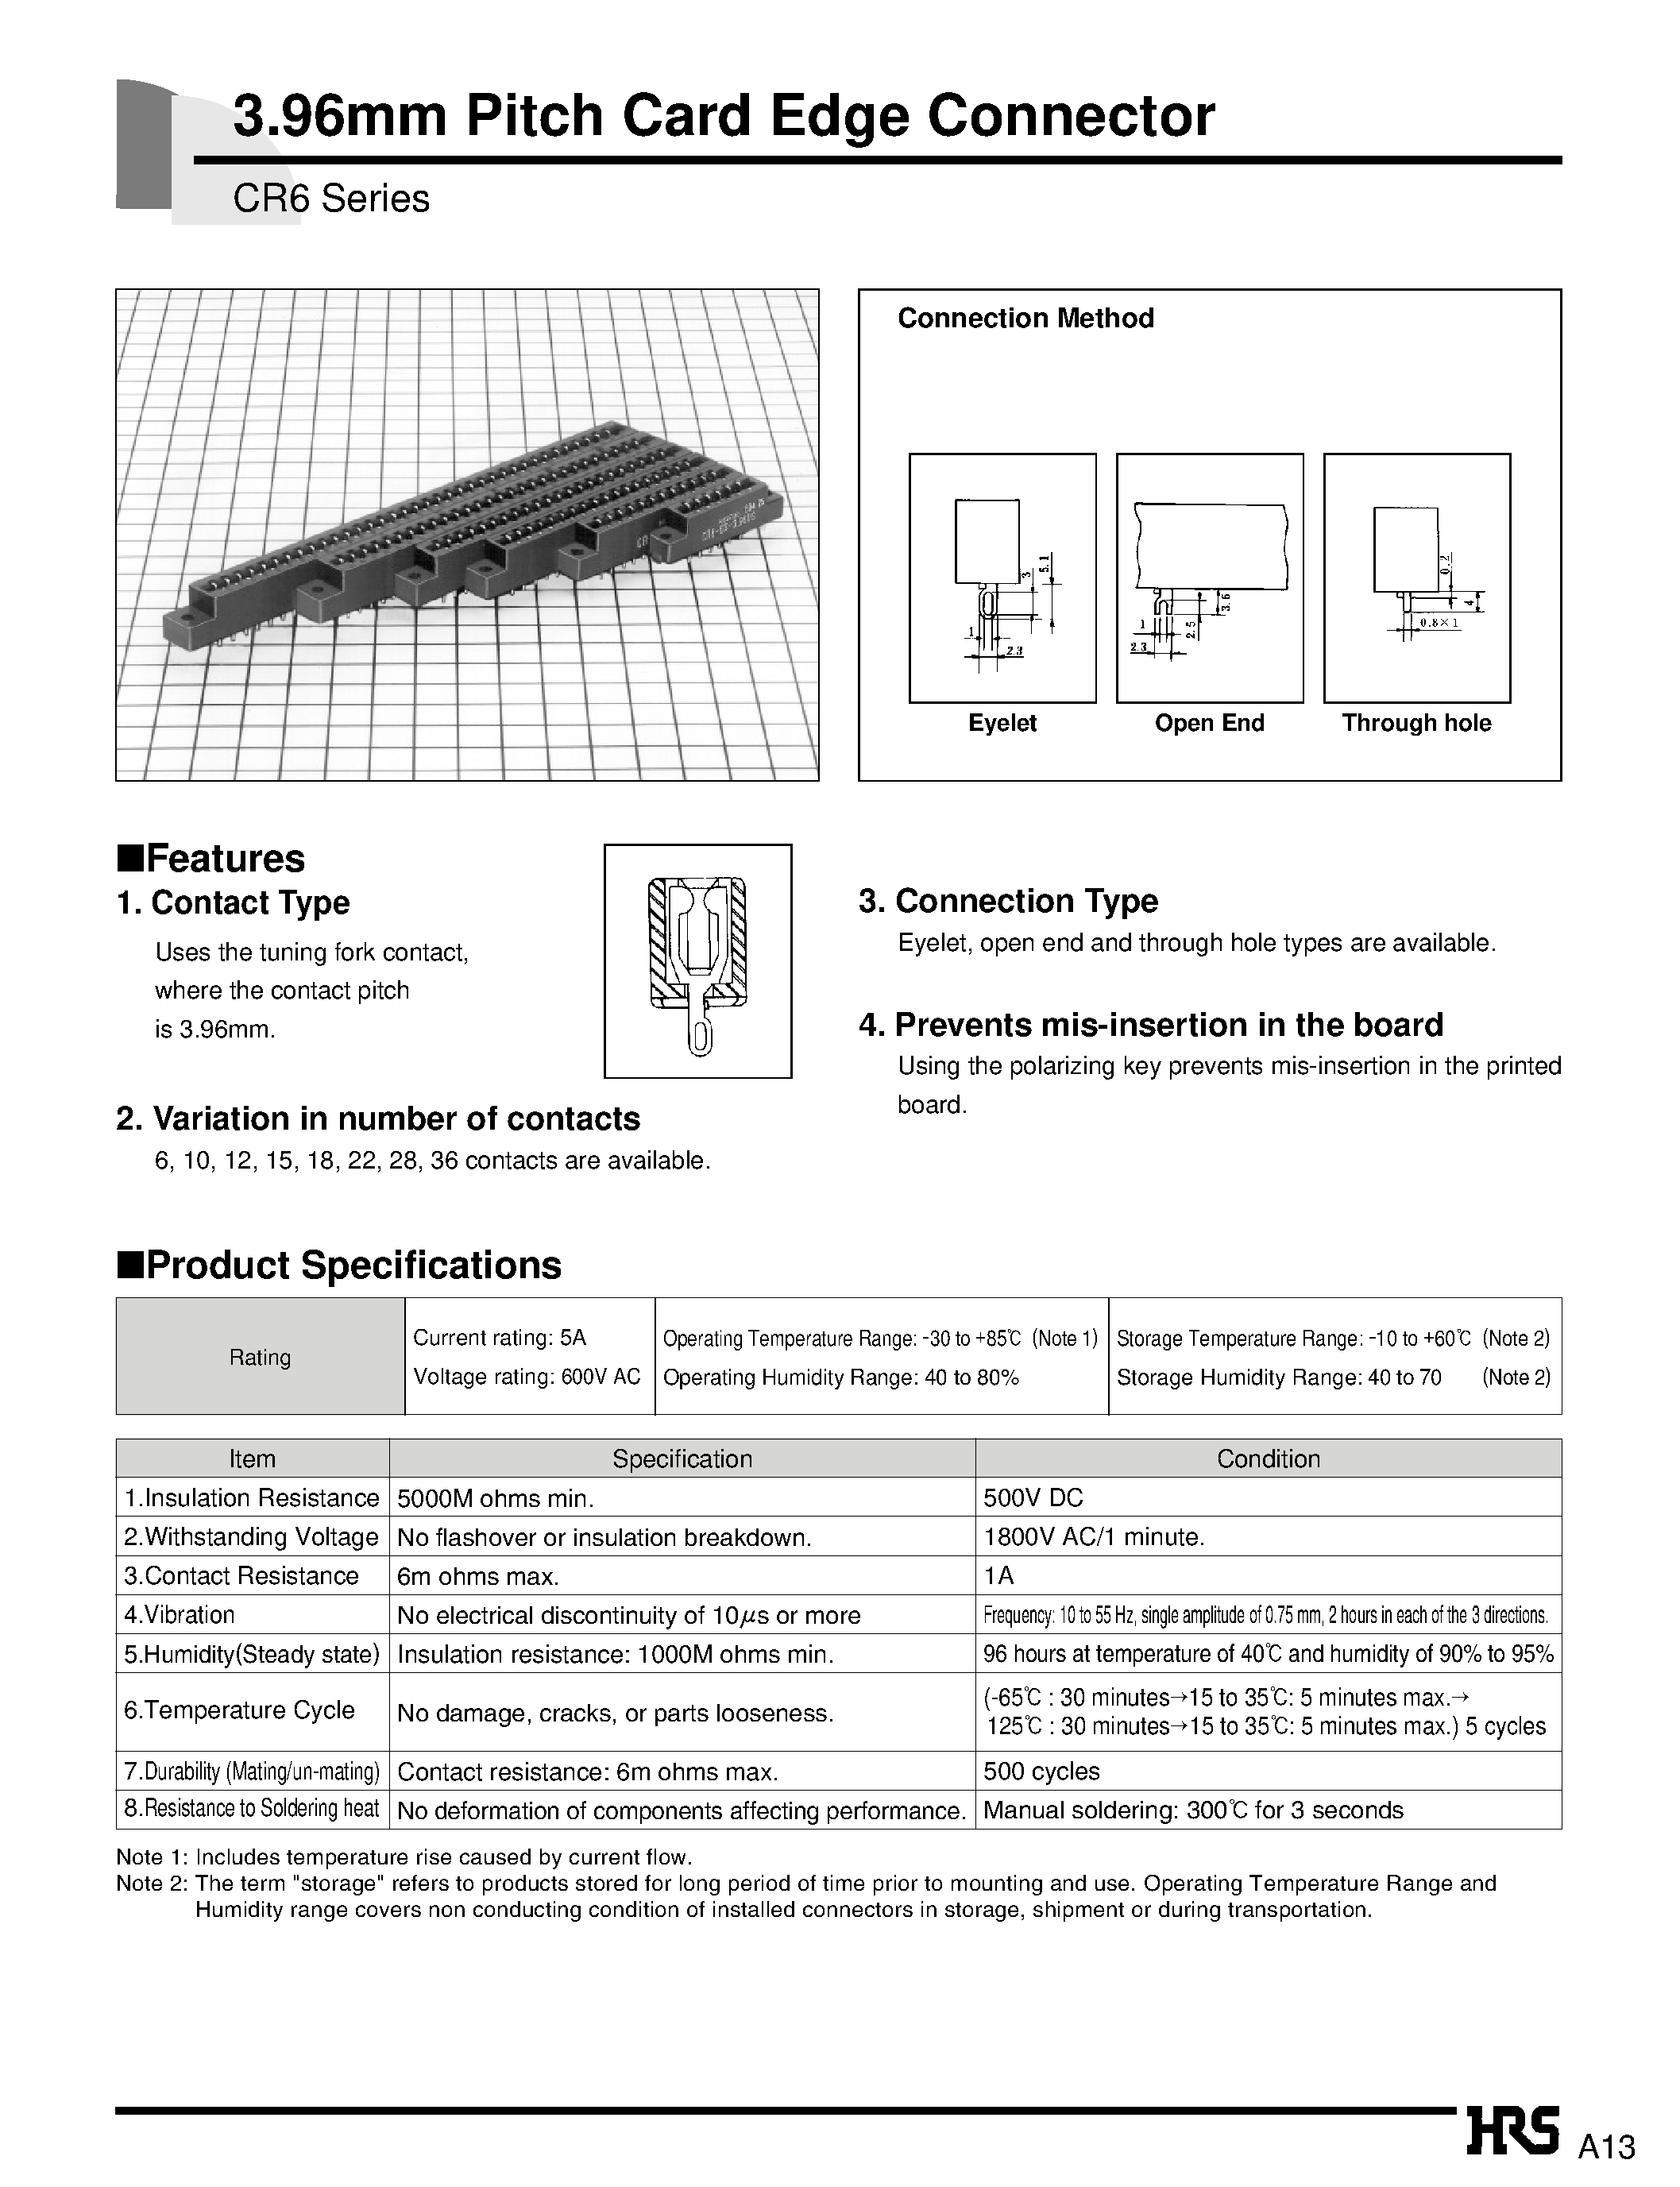 Datasheet CR6-18S-3.96E - 3.96mm Pitch Card Edge Connector page 1